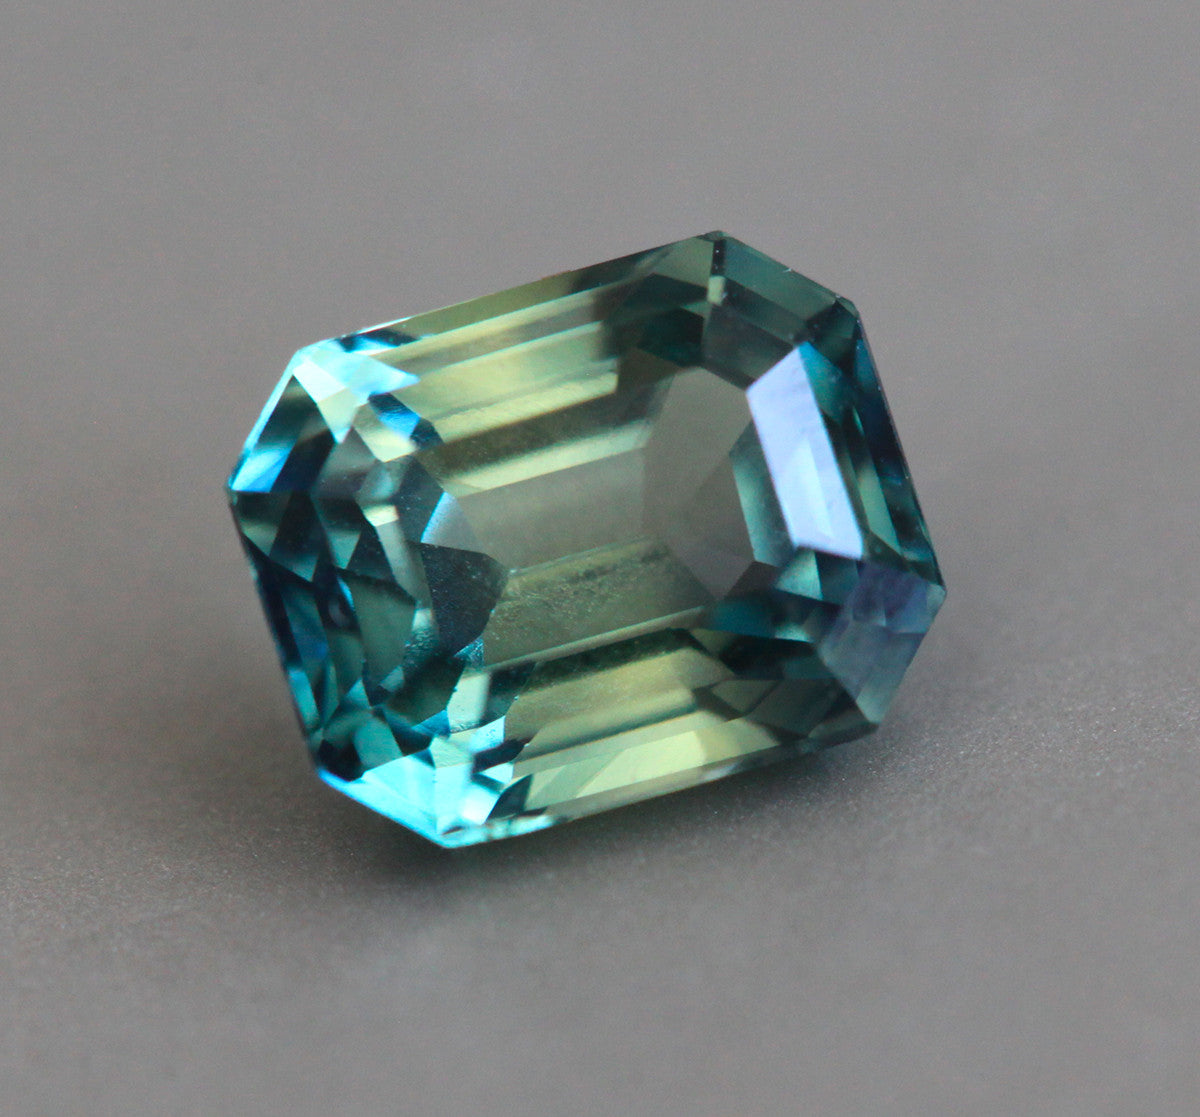 Loose octagon-shaped teal sapphire